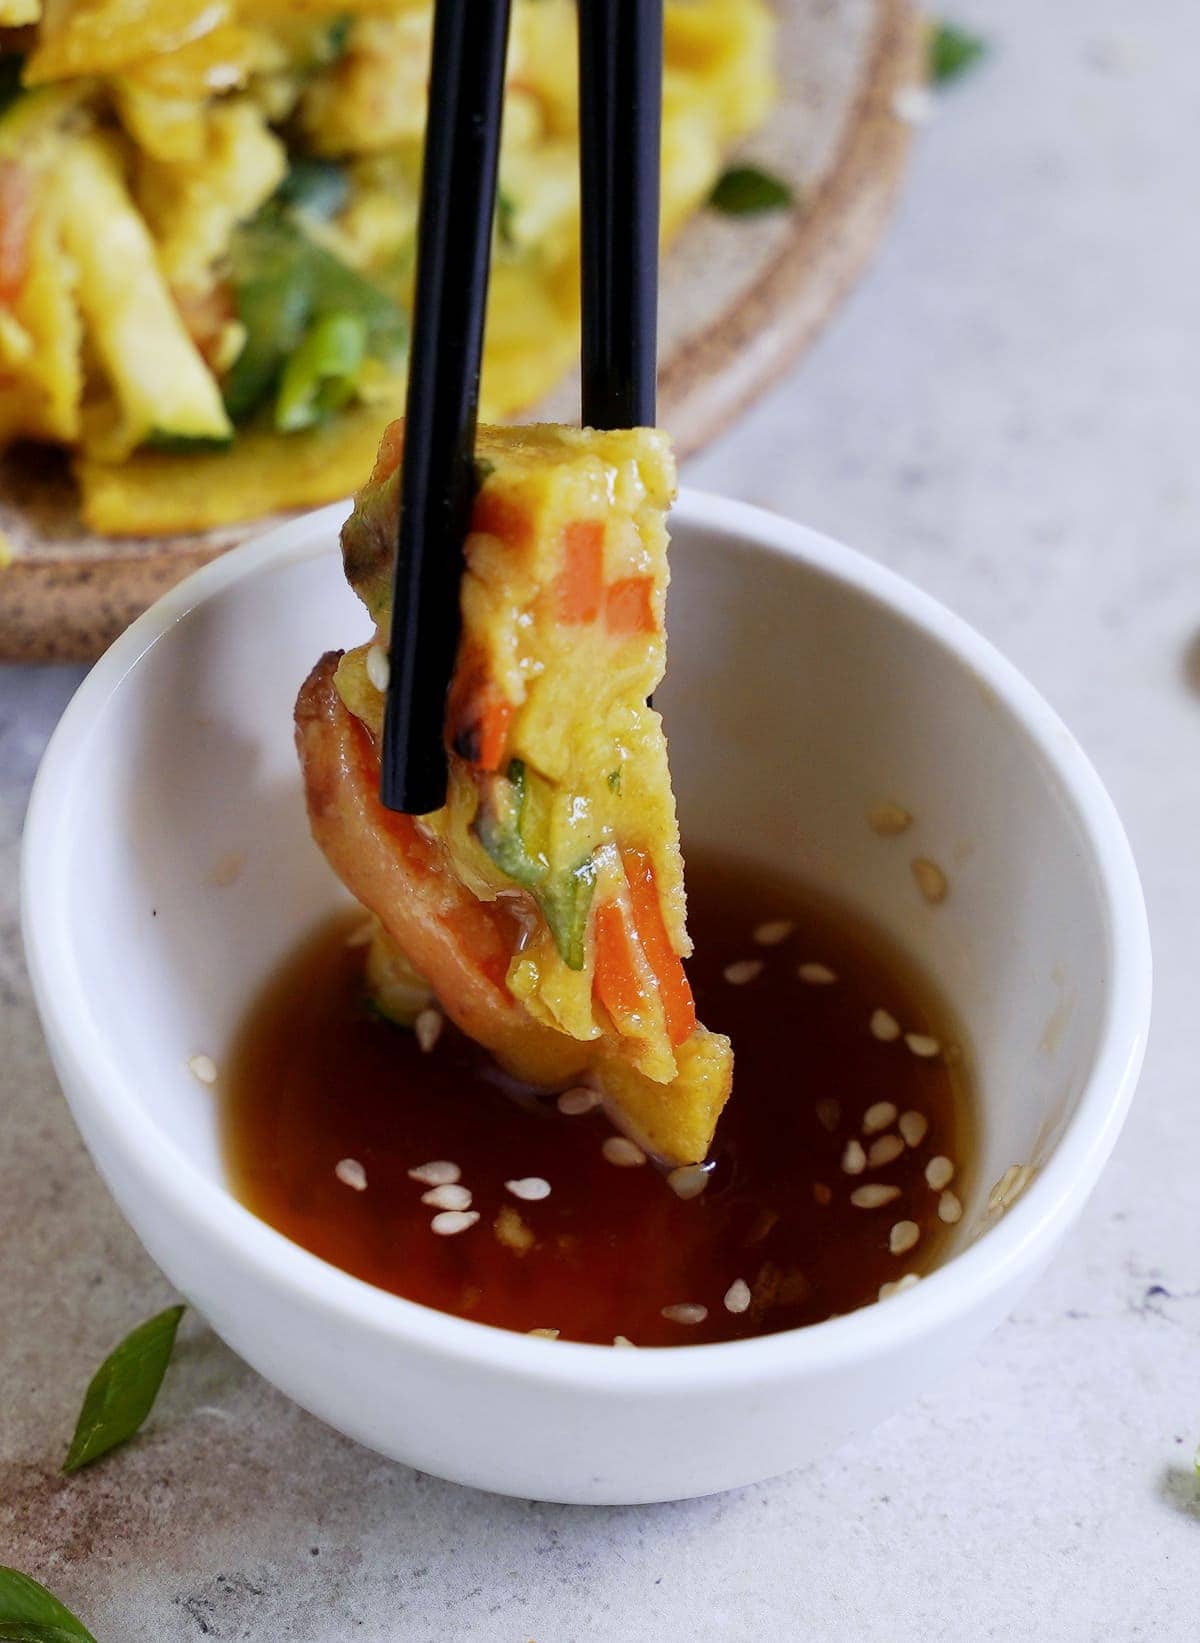 piece of pajeon dipped in brown sauce